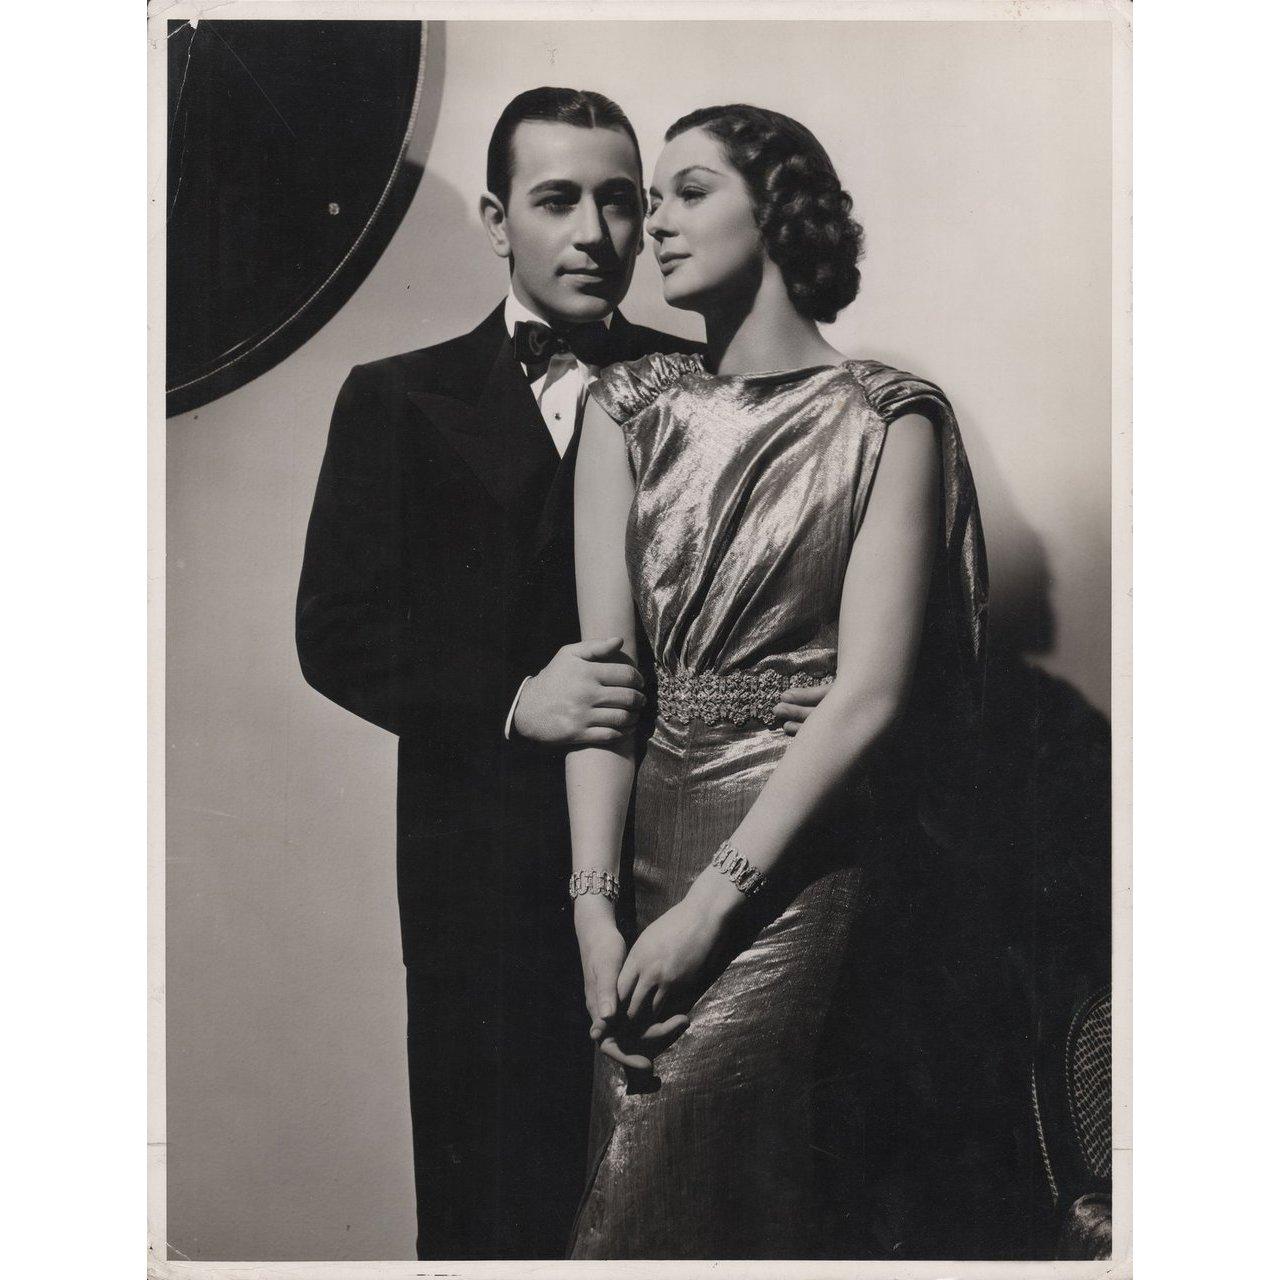 Original 1936 U.S. silver gelatin double-weight photo for the film It Had to Happen directed by Roy Del Ruth with George Raft / Rosalind Russell / Leo Carrillo. Very Good-Fine condition. Please note: the size is stated in inches and the actual size